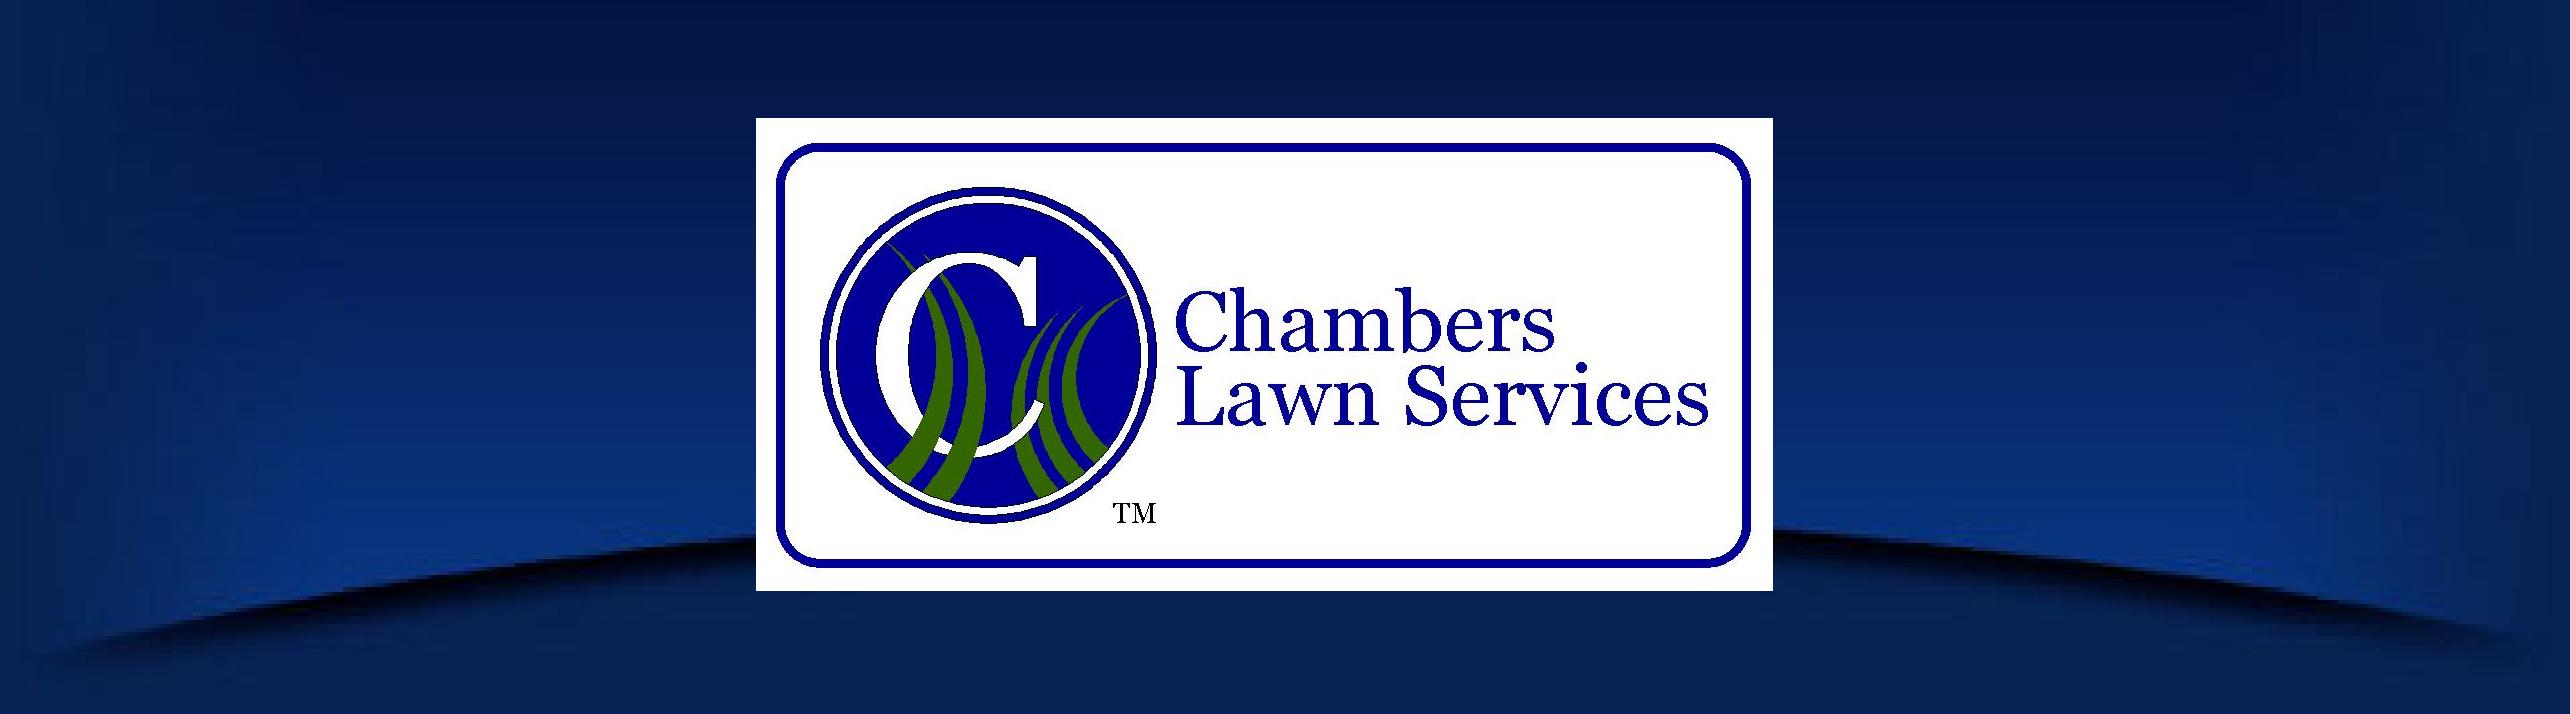 Chambers Lawn Services Logo